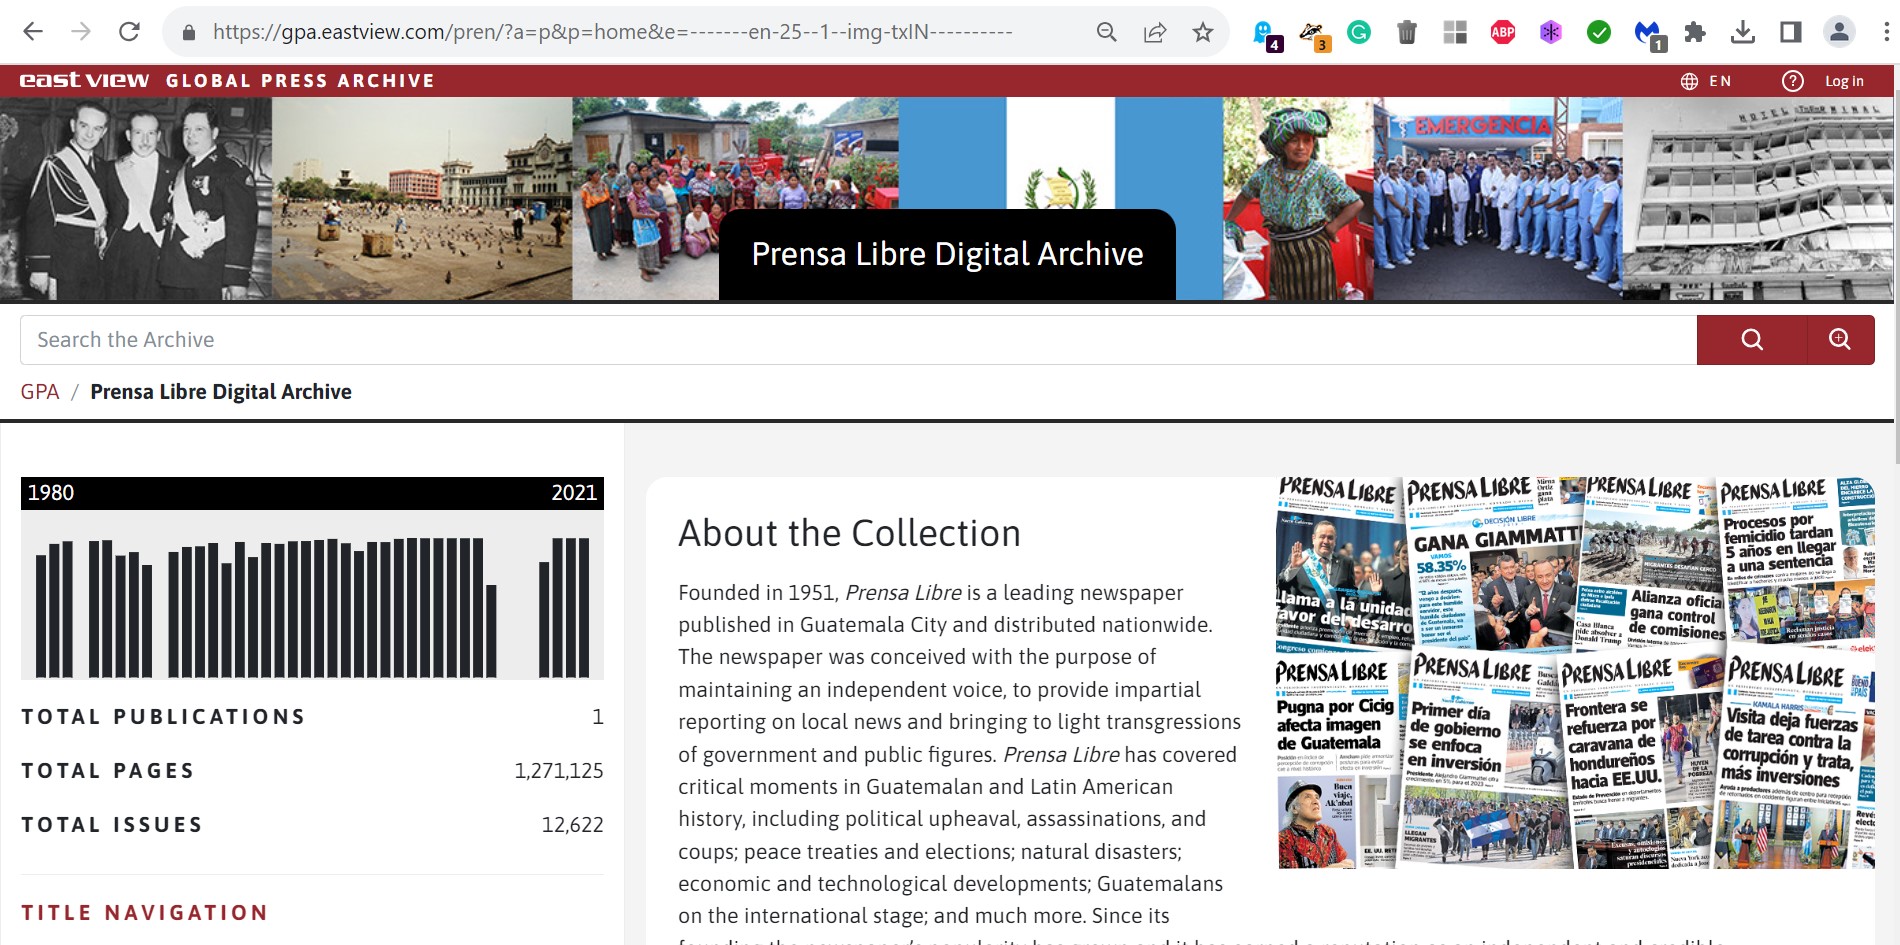 This is the landing page of the Presna Libre Newspaper's Digital Archive. Prensa Libre is a Guatemalan newspaper that was established in 1951. It has been digitized by EastVIew and as of September 5, 2023, issues from 1980 through 2022 were accessible.